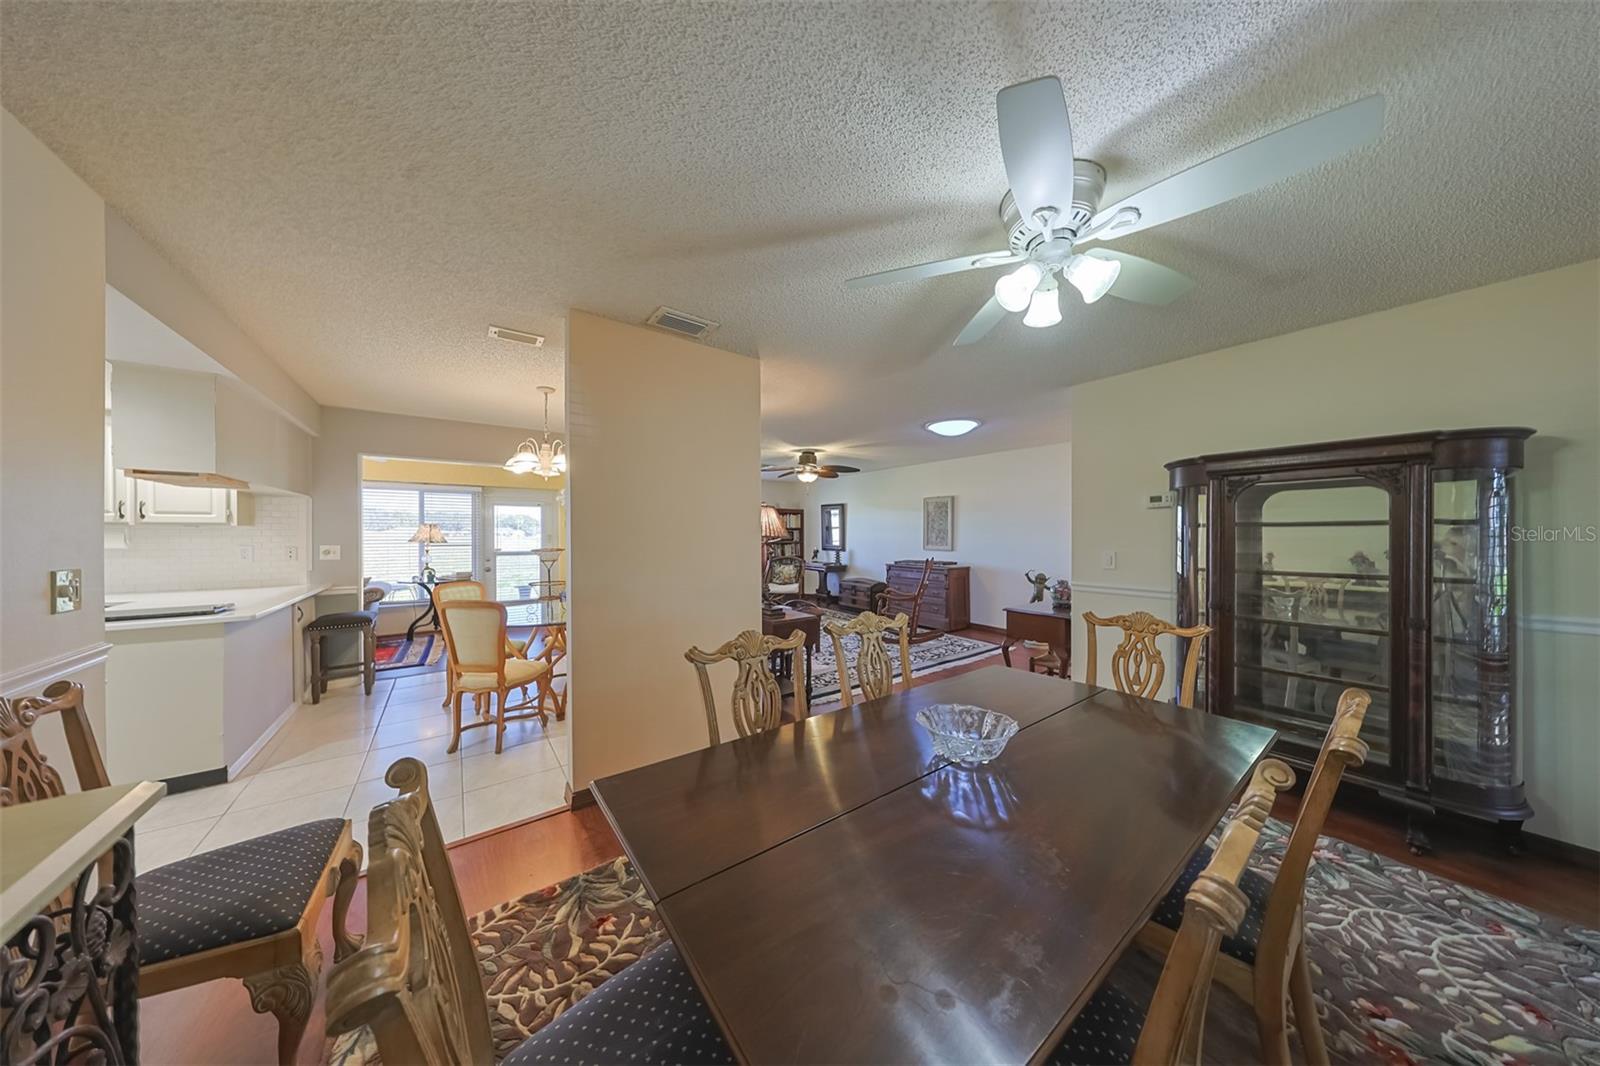 Kitchen is bright, open and spacious, with a tray ceiling, recessed lighting and a ceiling fan for comfort while cooking.  The eat-in area is convenient and even has a view of the golf course.